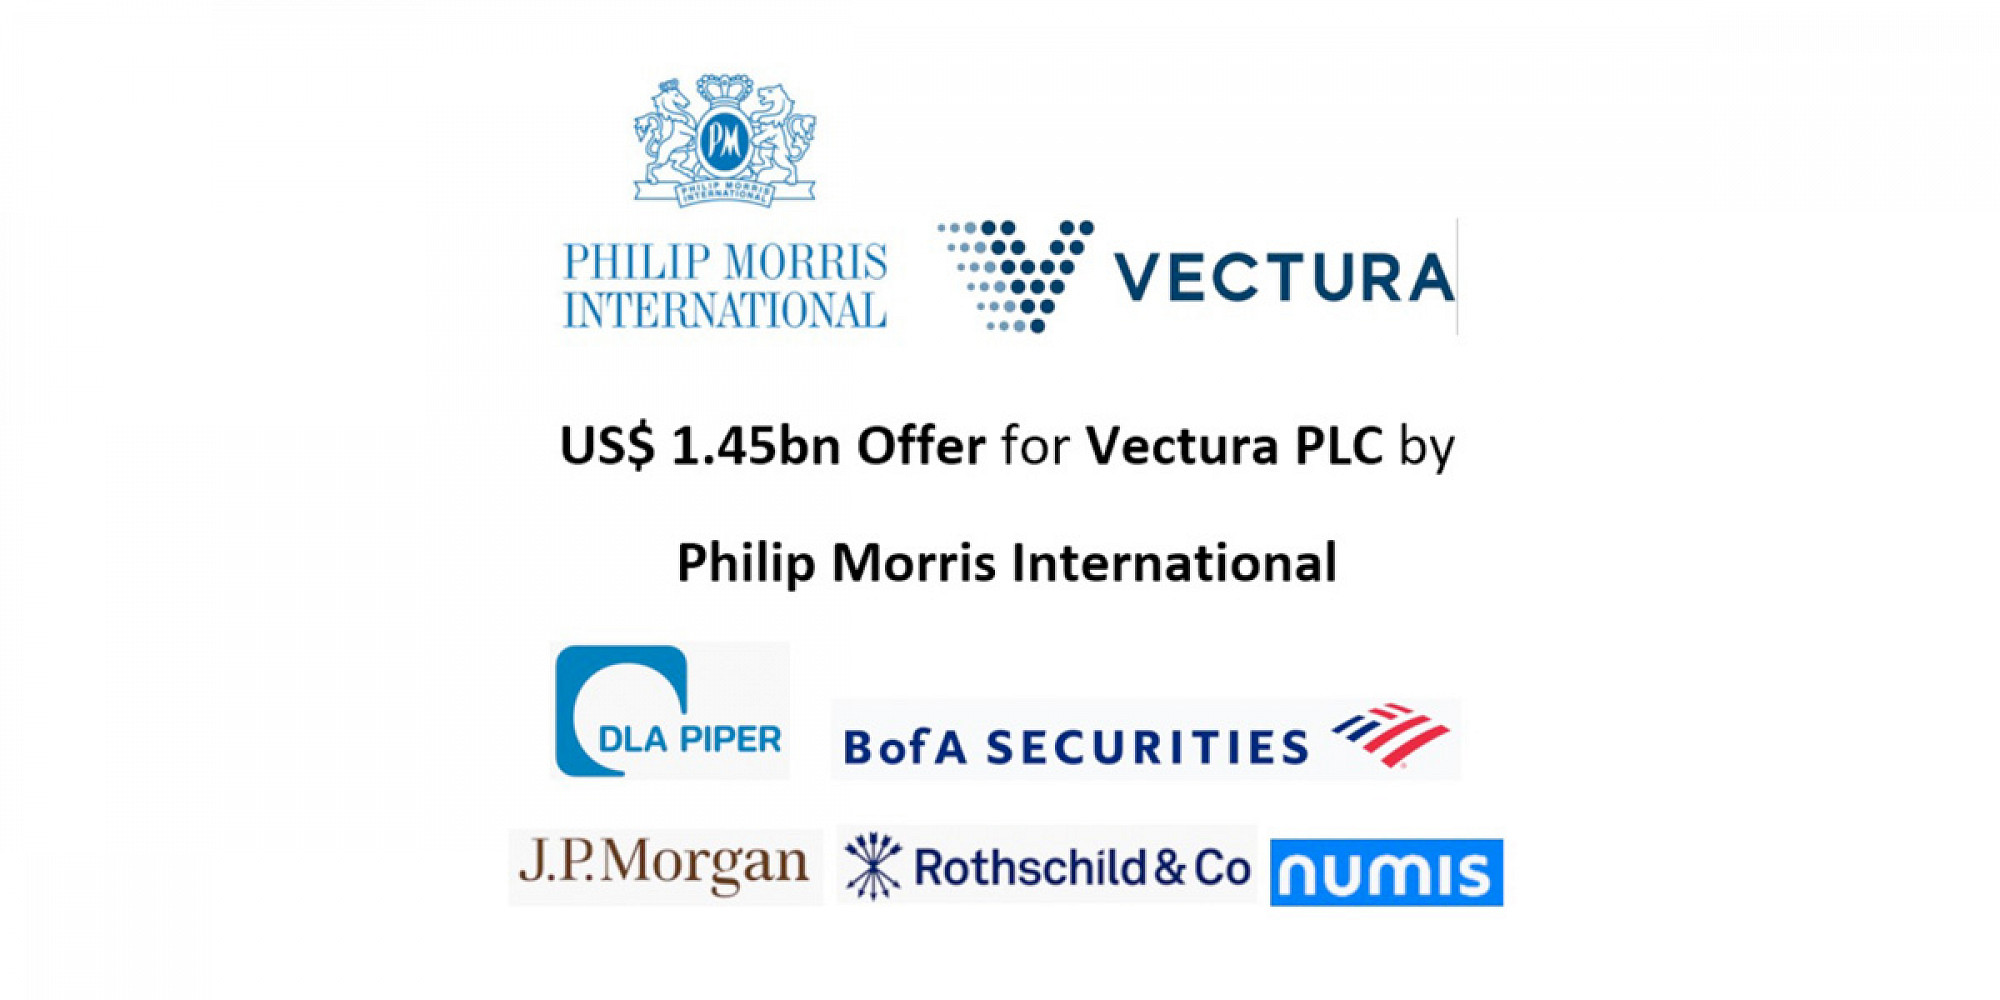 US$ 1.45bn Offer for Vectura PLC by Philip Morris International